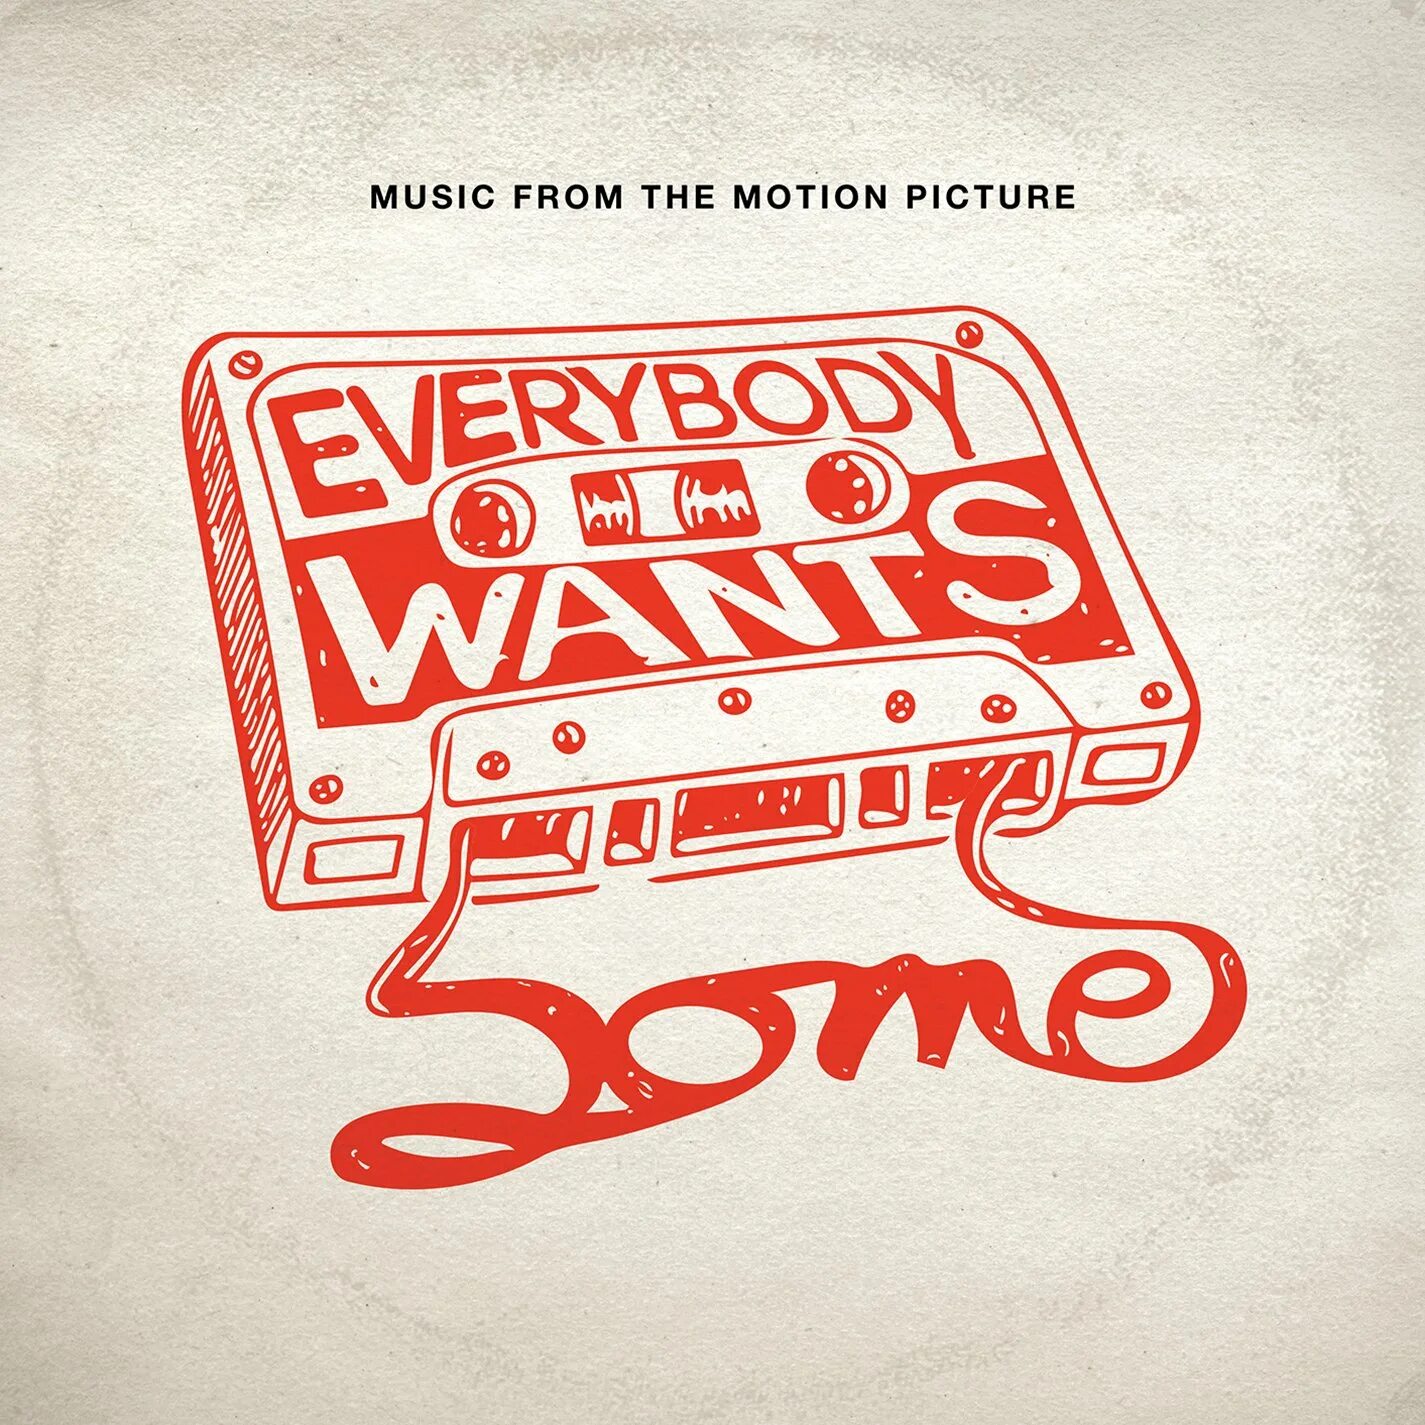 Everybody everybody song. Everybody wants some. Саундтреки альбом. Everybody артист. Music from the Motion picture.